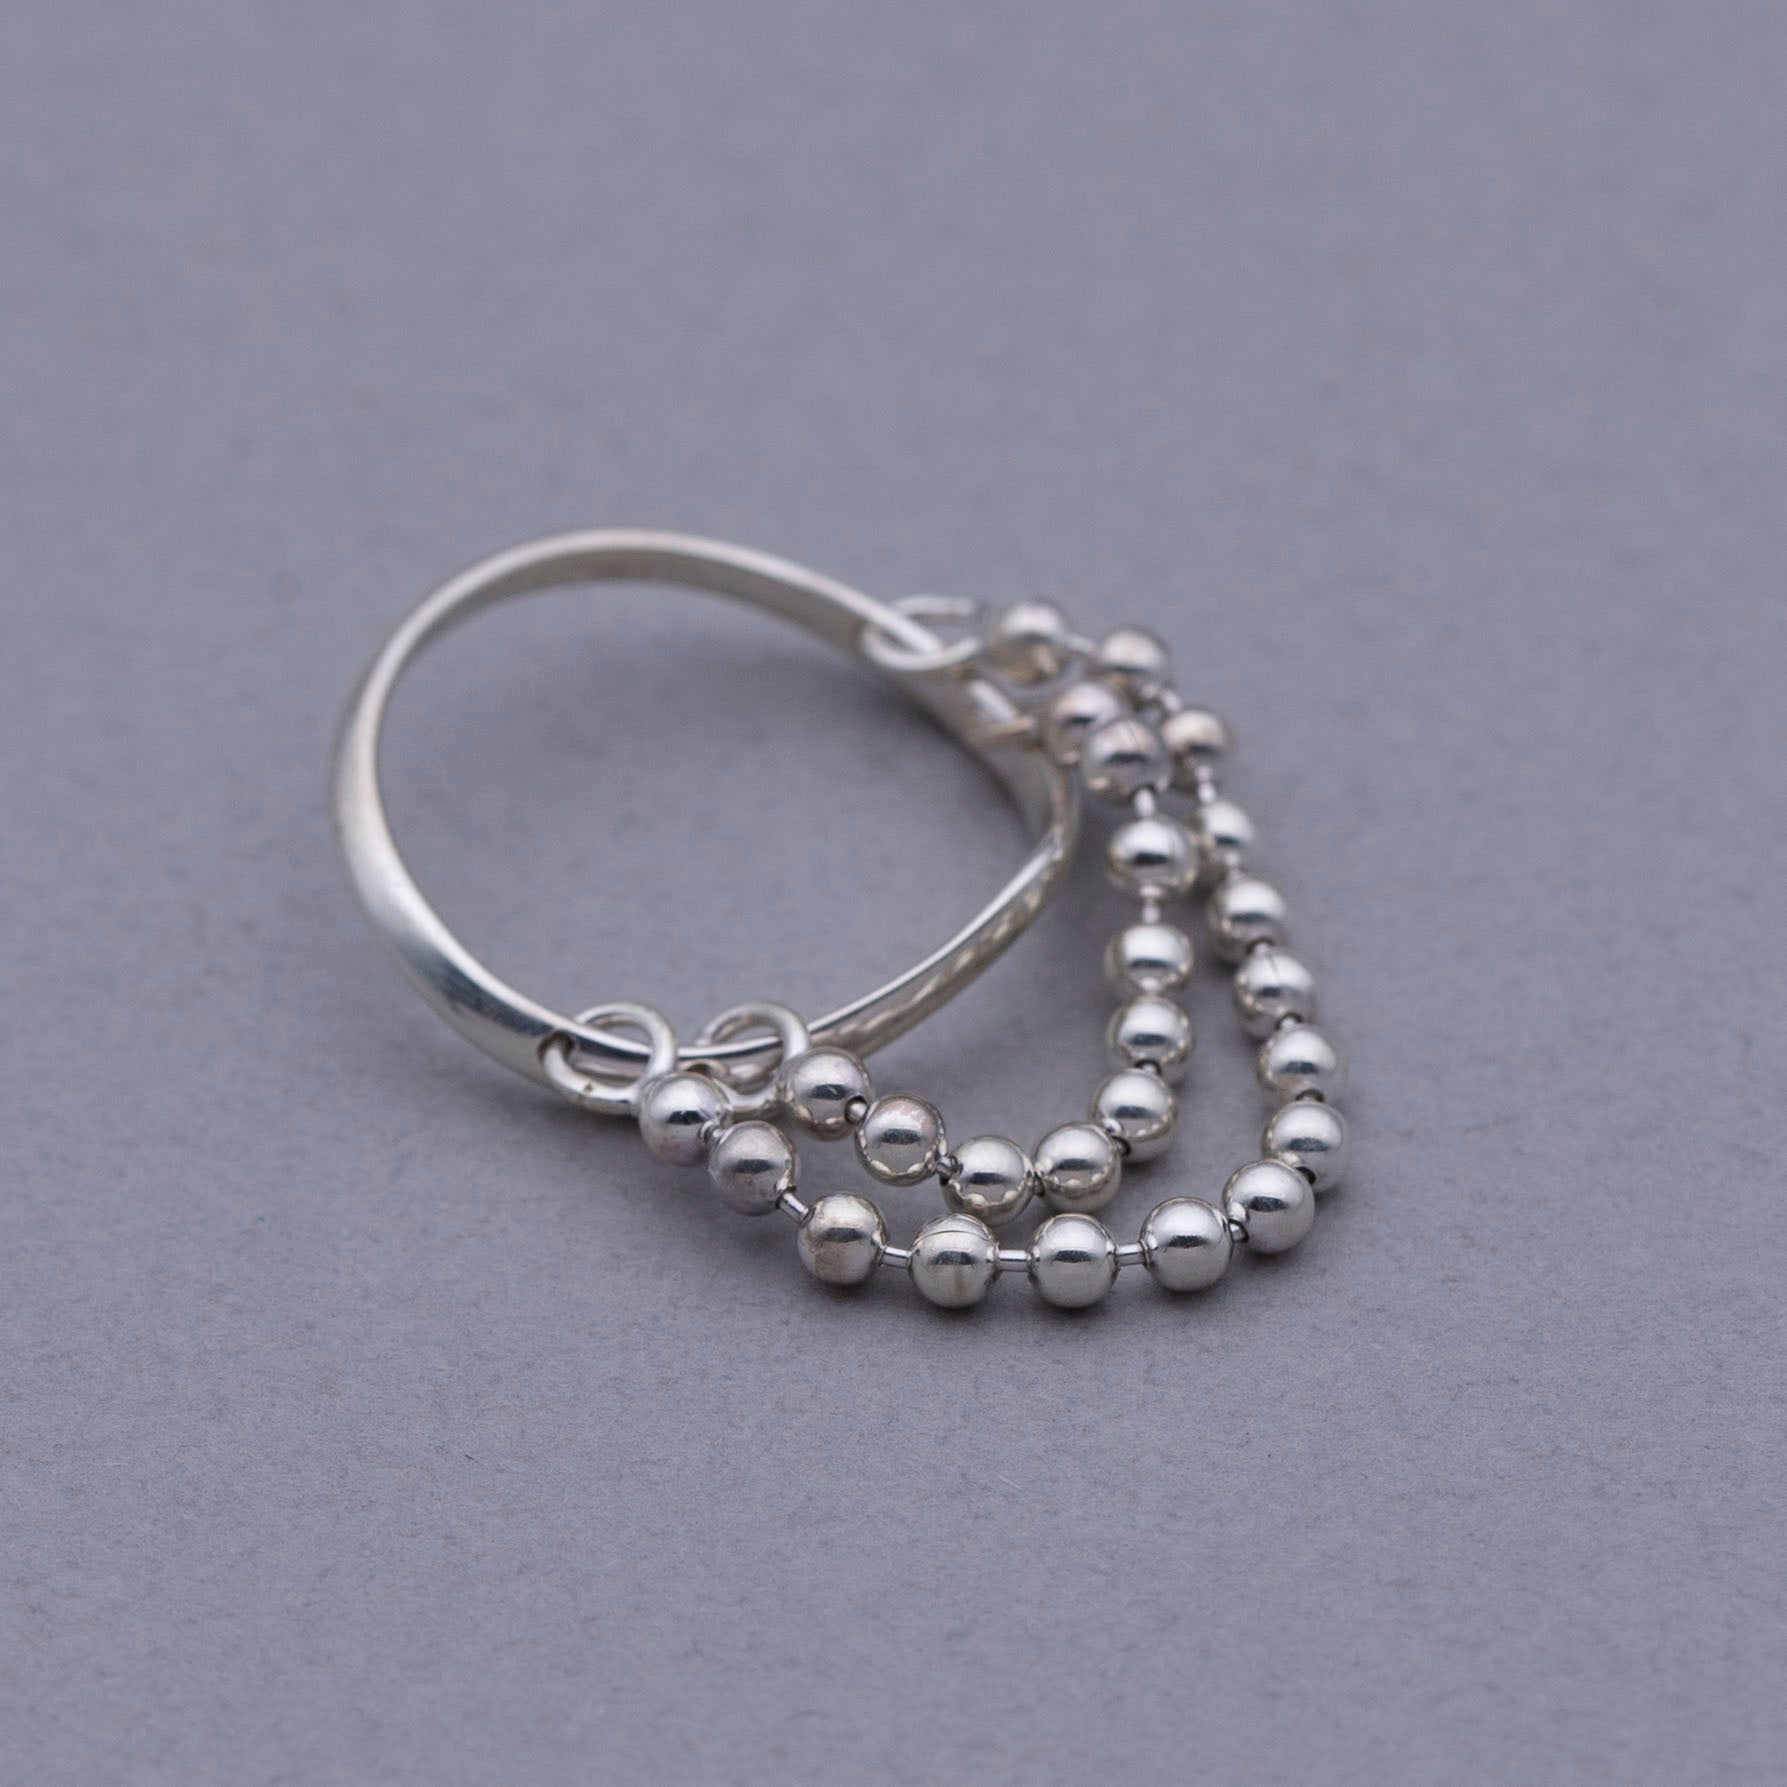 Heritage ball chain ring Silver